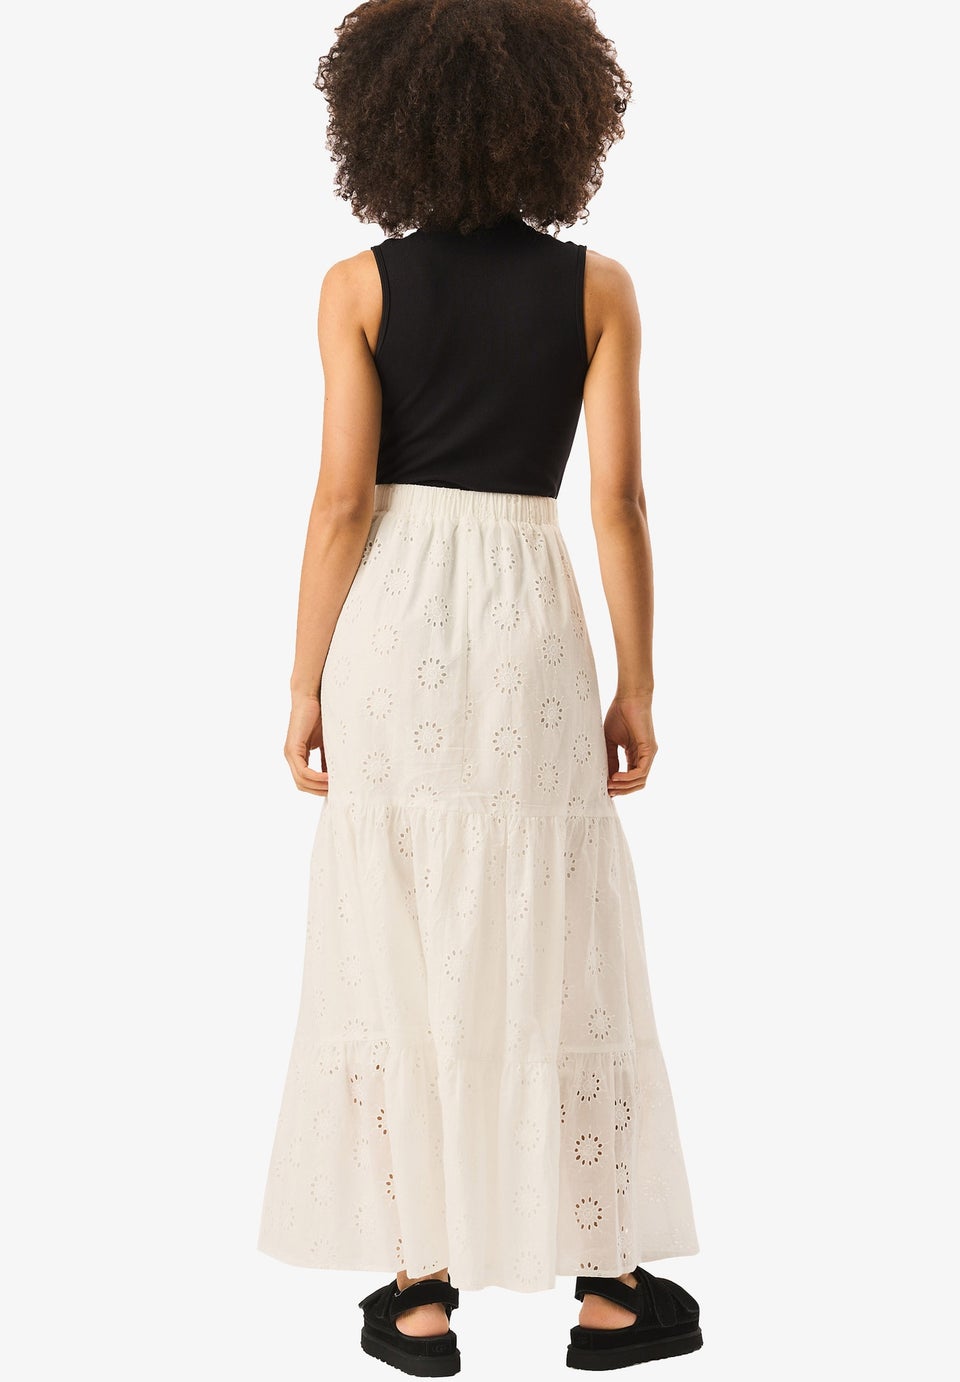 Gini London White Tiered Lace Embroidered Long Skirt